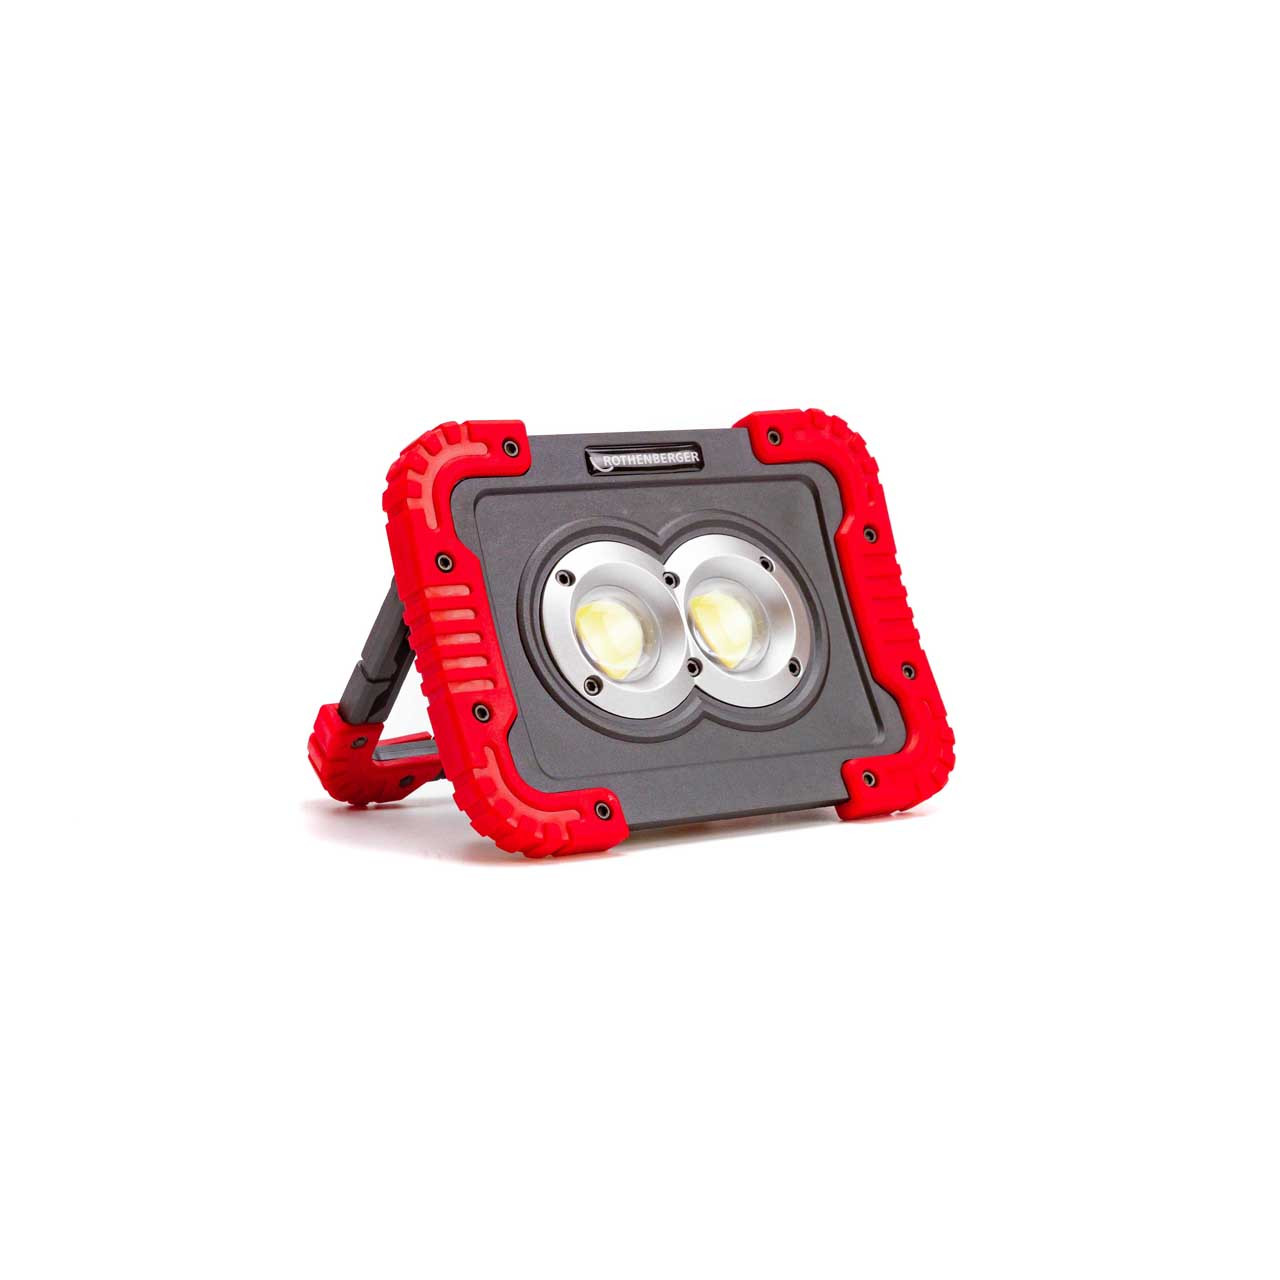 Photograph of Rothenberger RO1150 LED COB Rechargeable Work Lamp